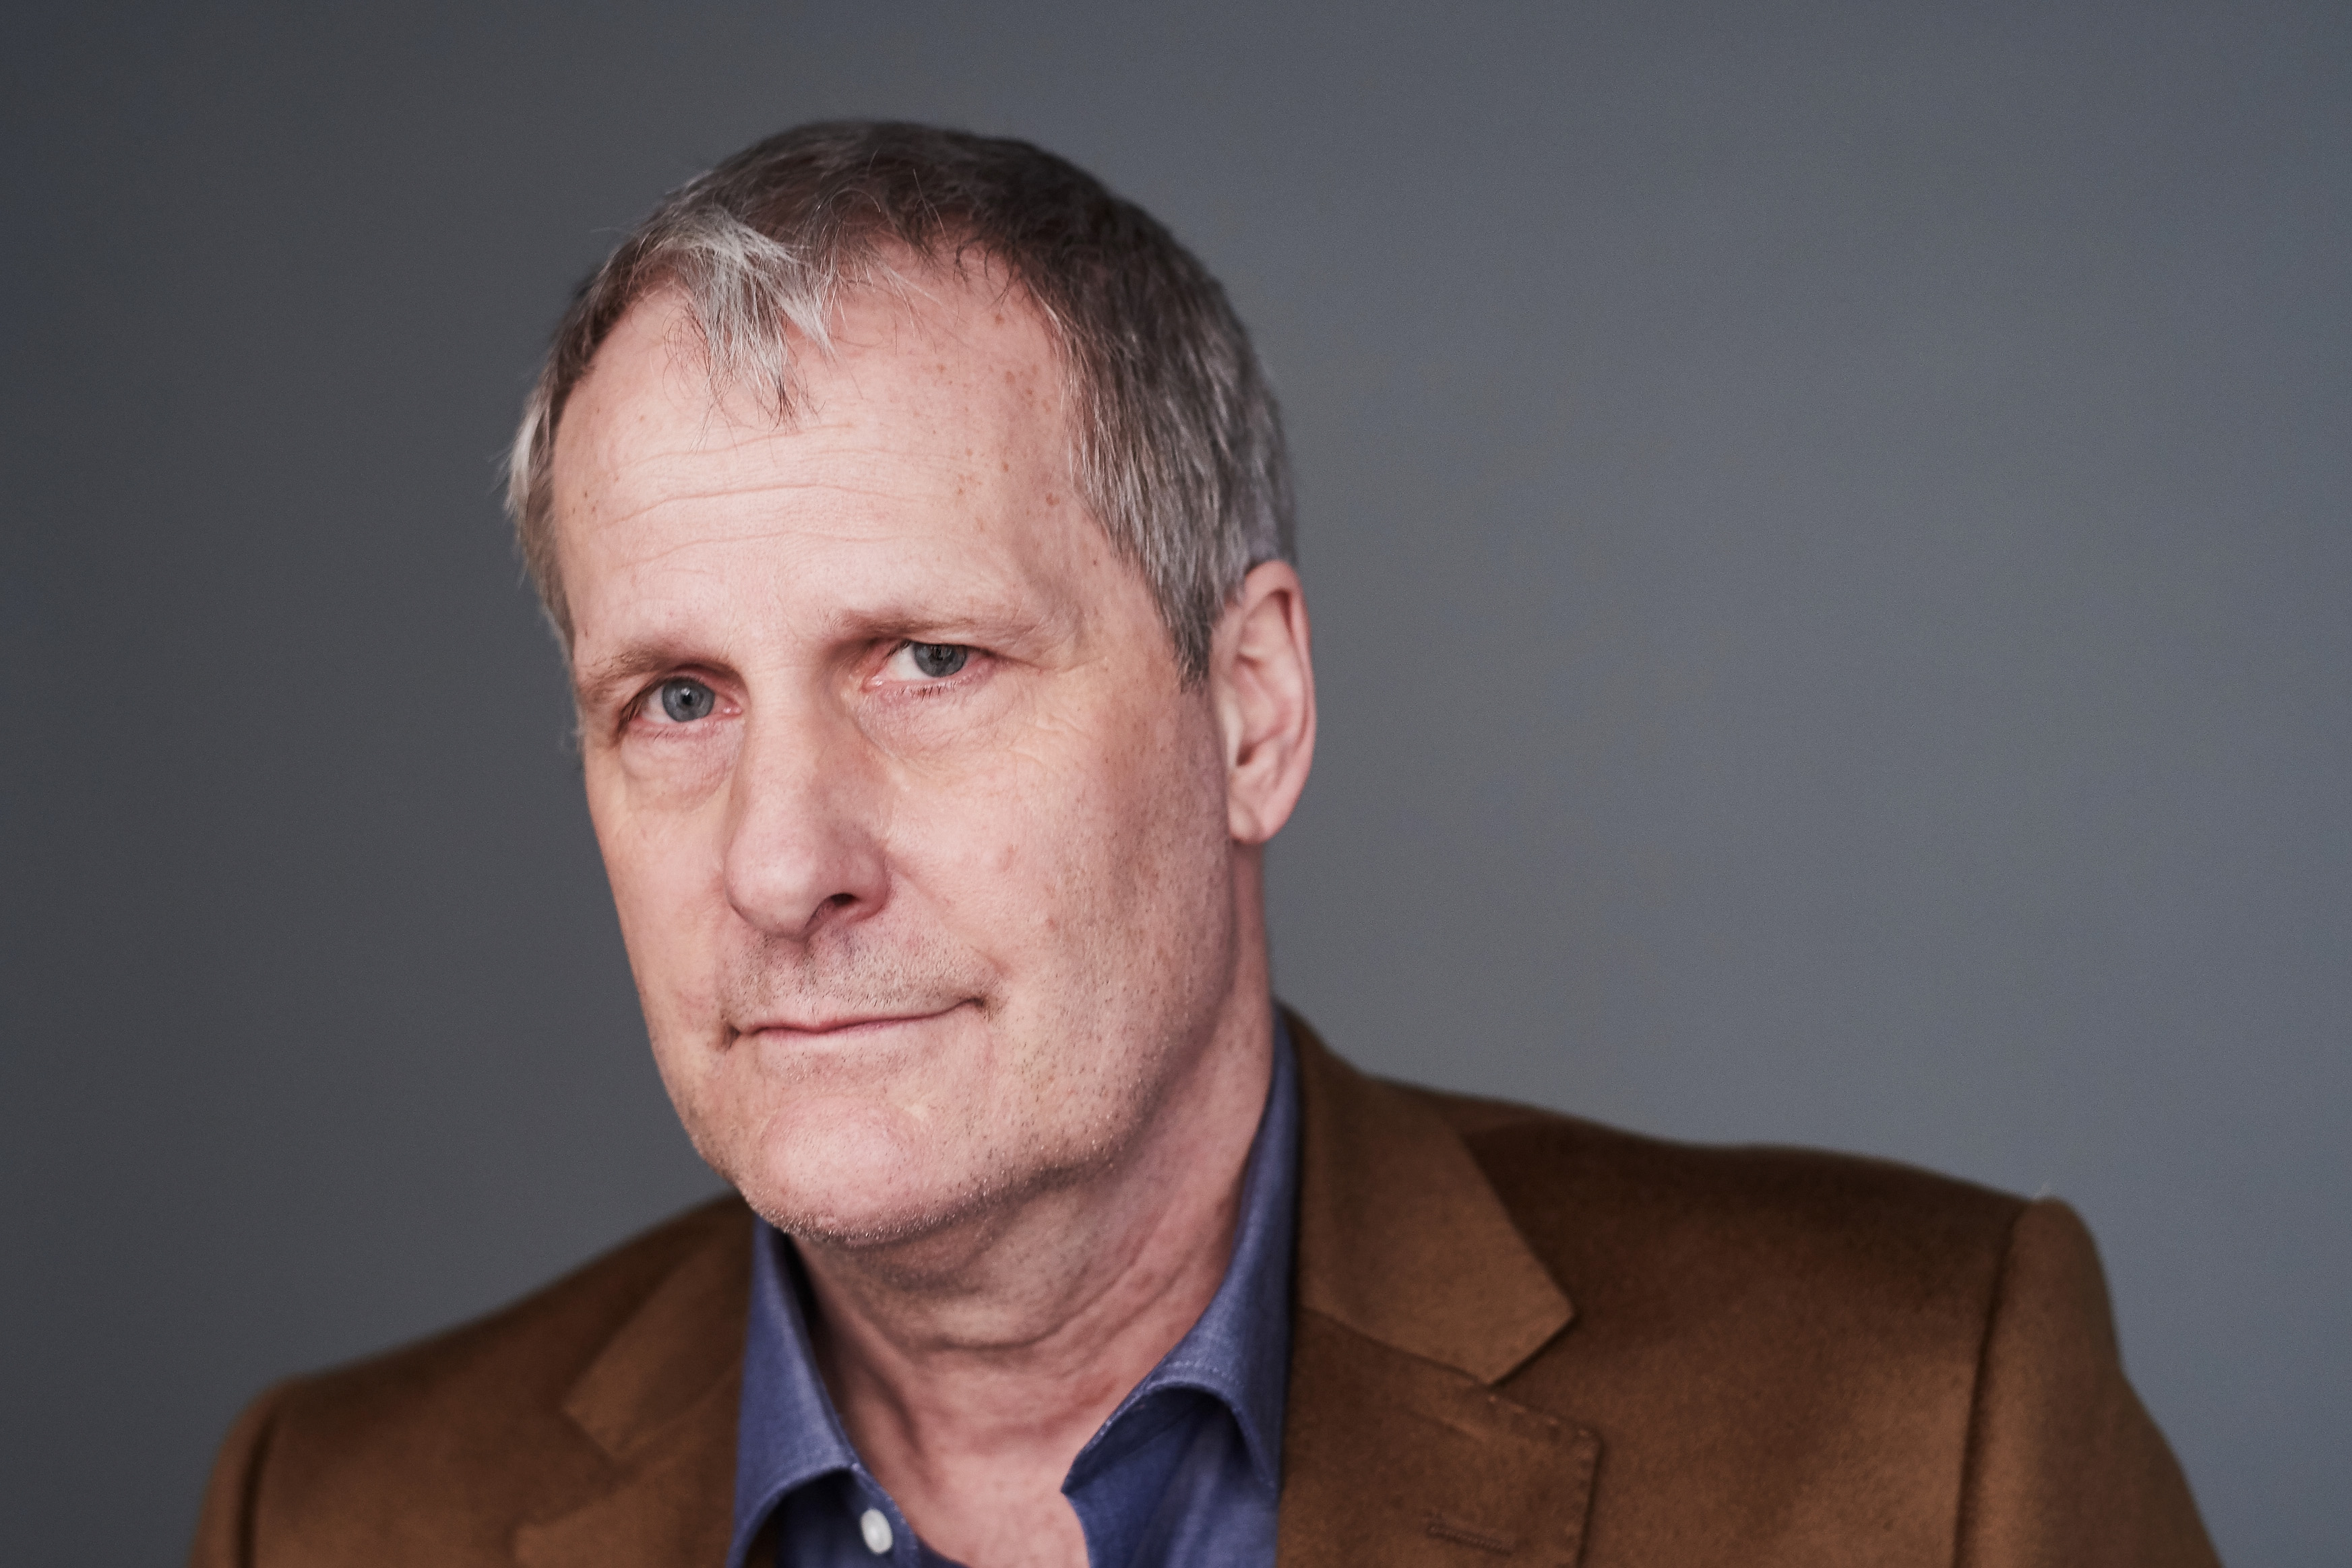 Actor Jeff Daniels poses for a portrait at the 2016 Tony Awards Meet The Nominees Press Reception on May 4, 2016 in New York City. (Larry Busacca—Getty Images Portrait for Tony Awards Productions)